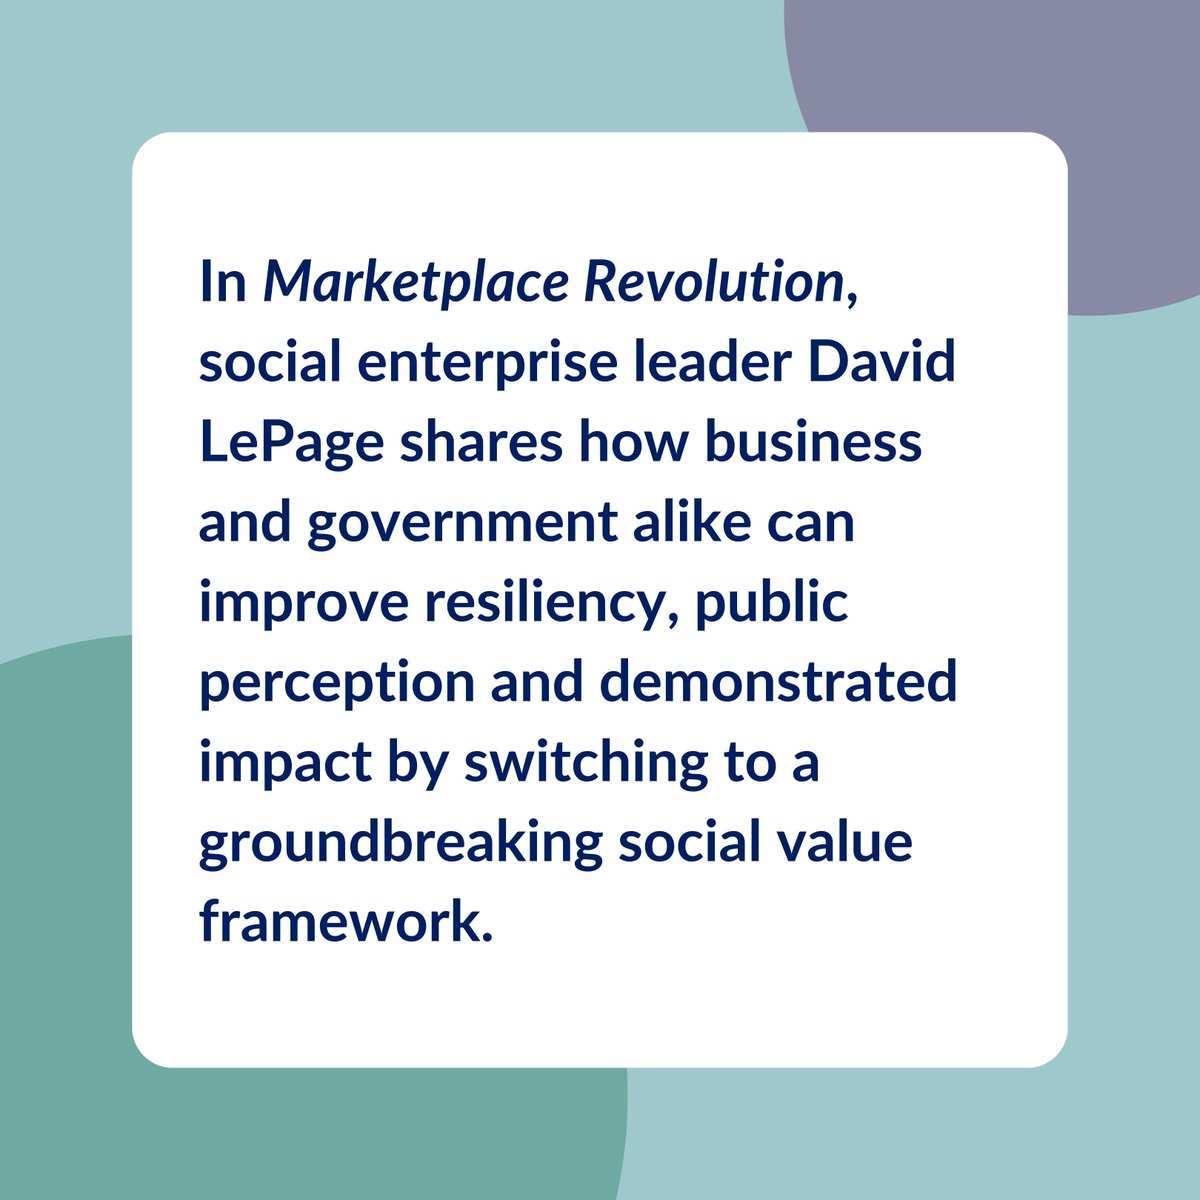 Last chance for pre-orders: #MarketplaceRevolution releases tomorrow, April 9! #BuyTheBook and deepen your understanding of the tools we can all use to take back control from the invisible hand of capitalism. buff.ly/3hvvahI